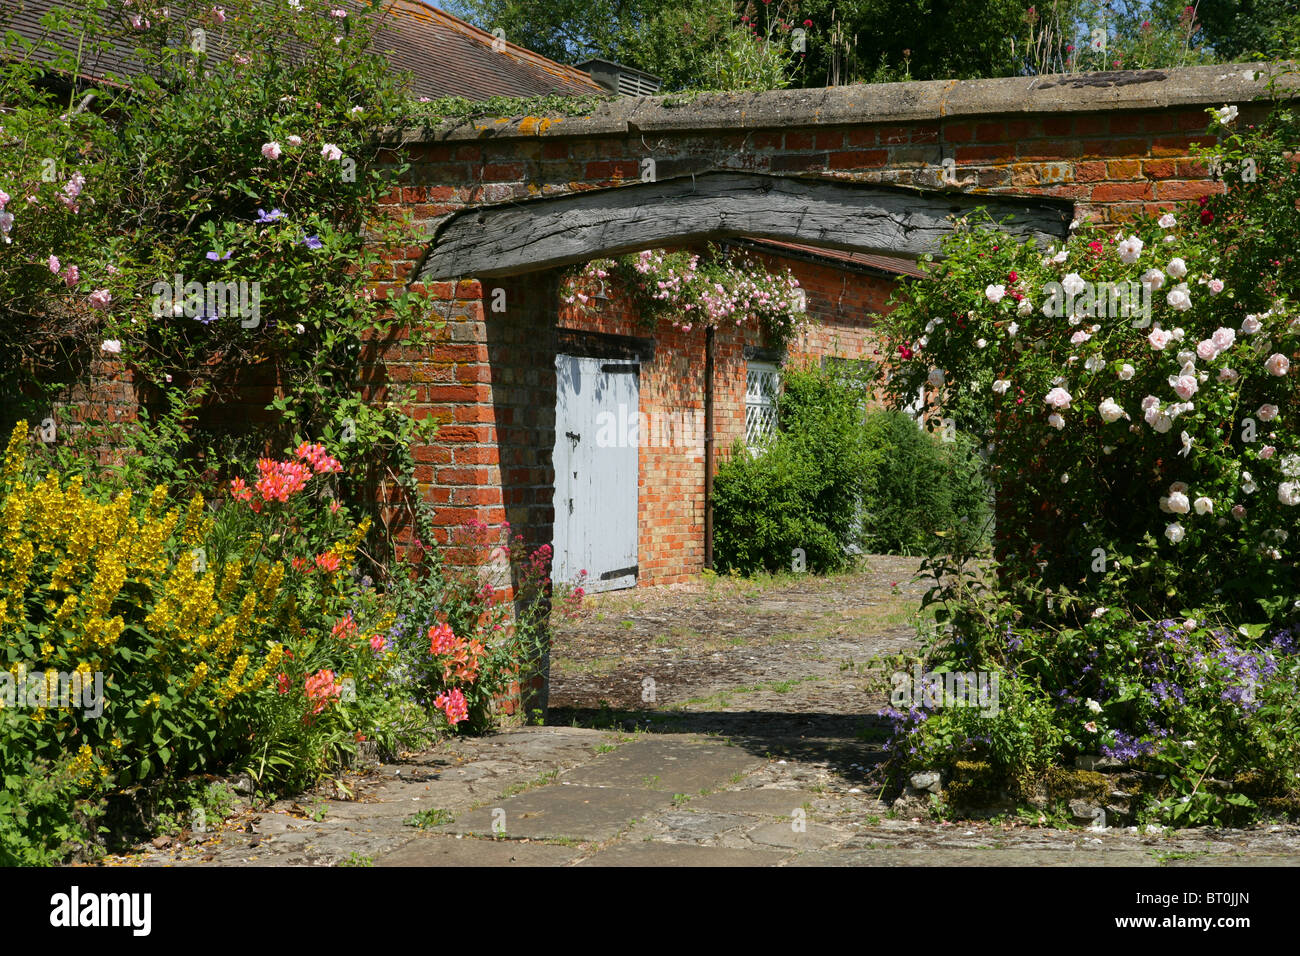 Old farmhouse brick and wooden archway leading into stable yard with summer roses and hanging baskets, England. Stock Photo